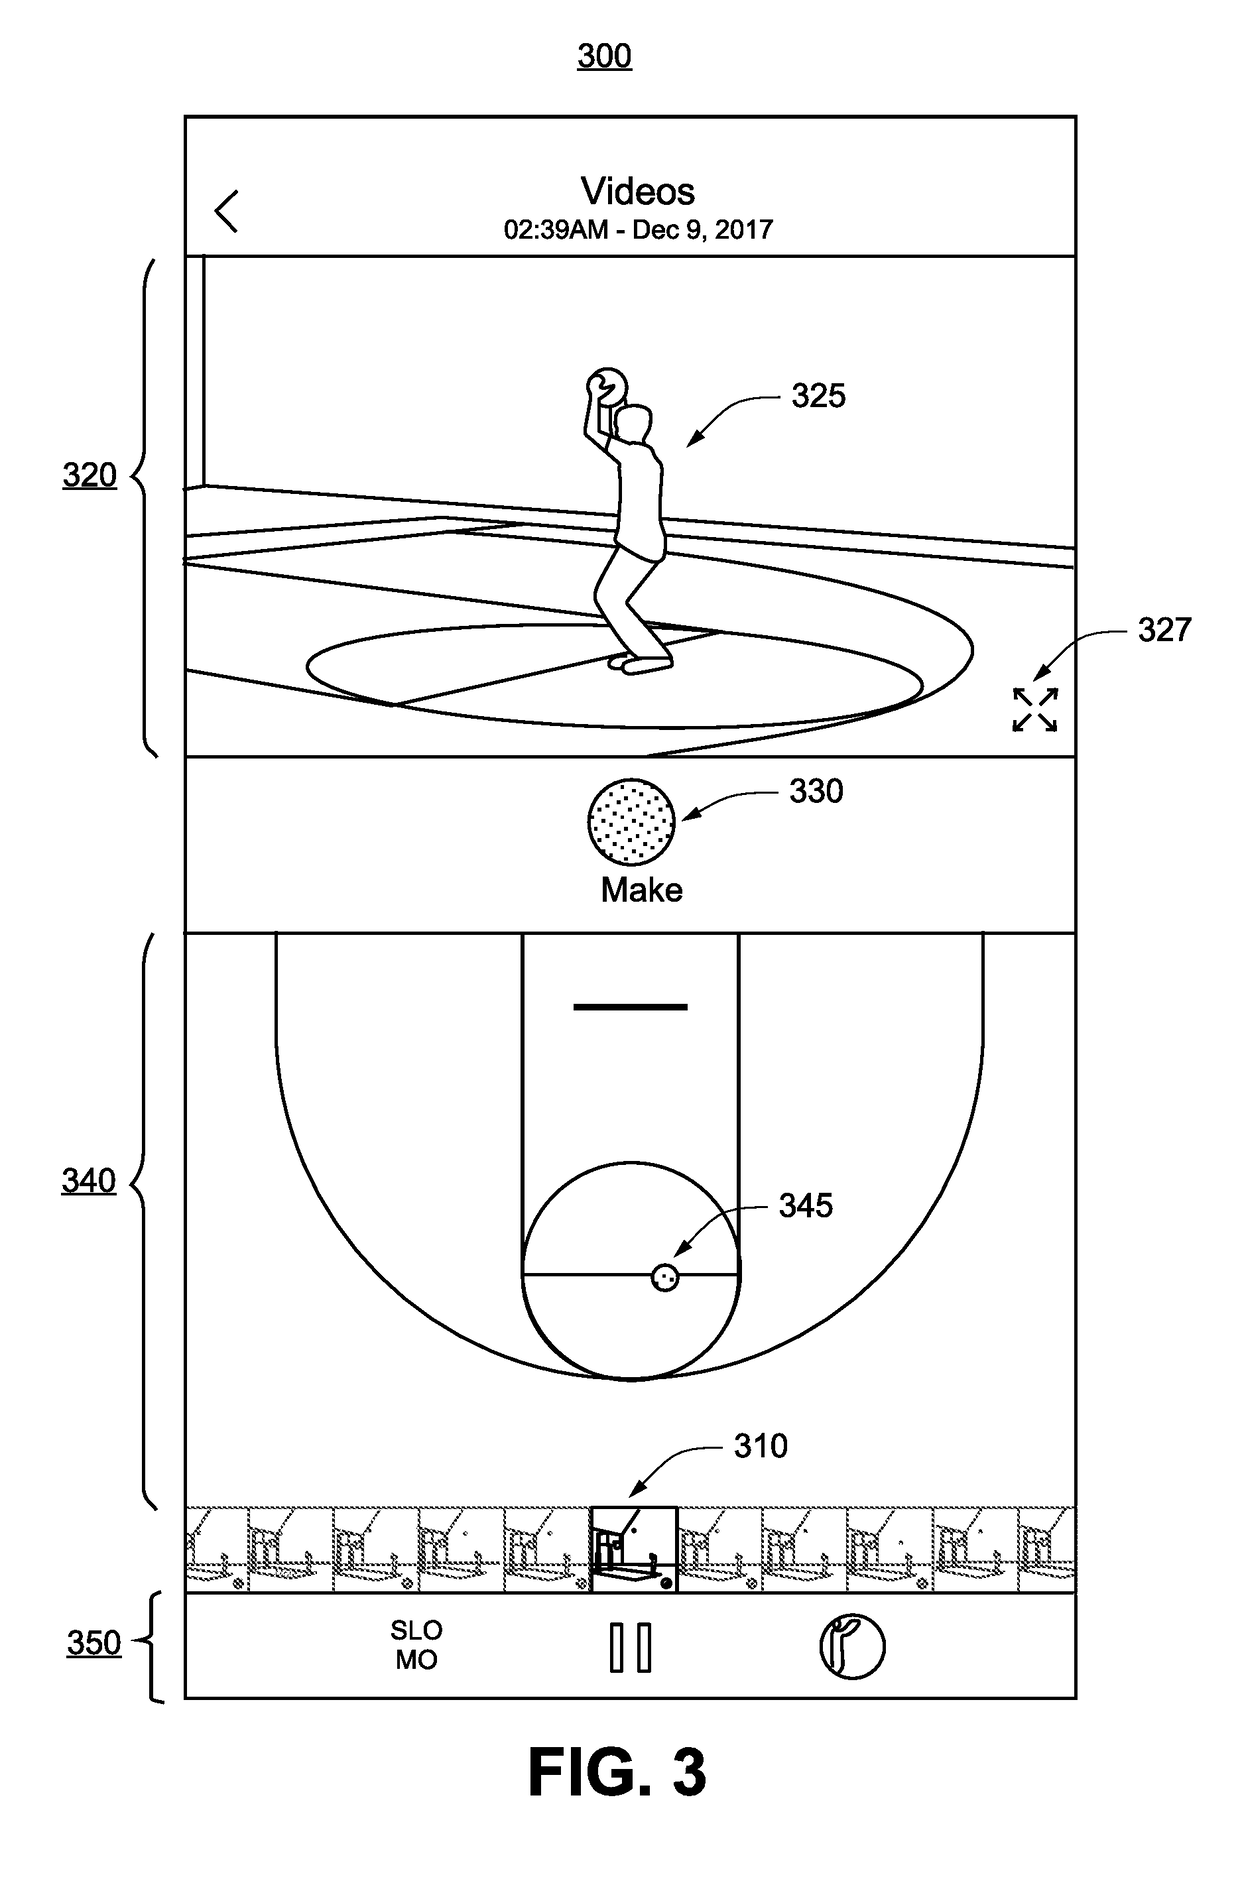 Methods and systems for ball game analytics with a mobile device